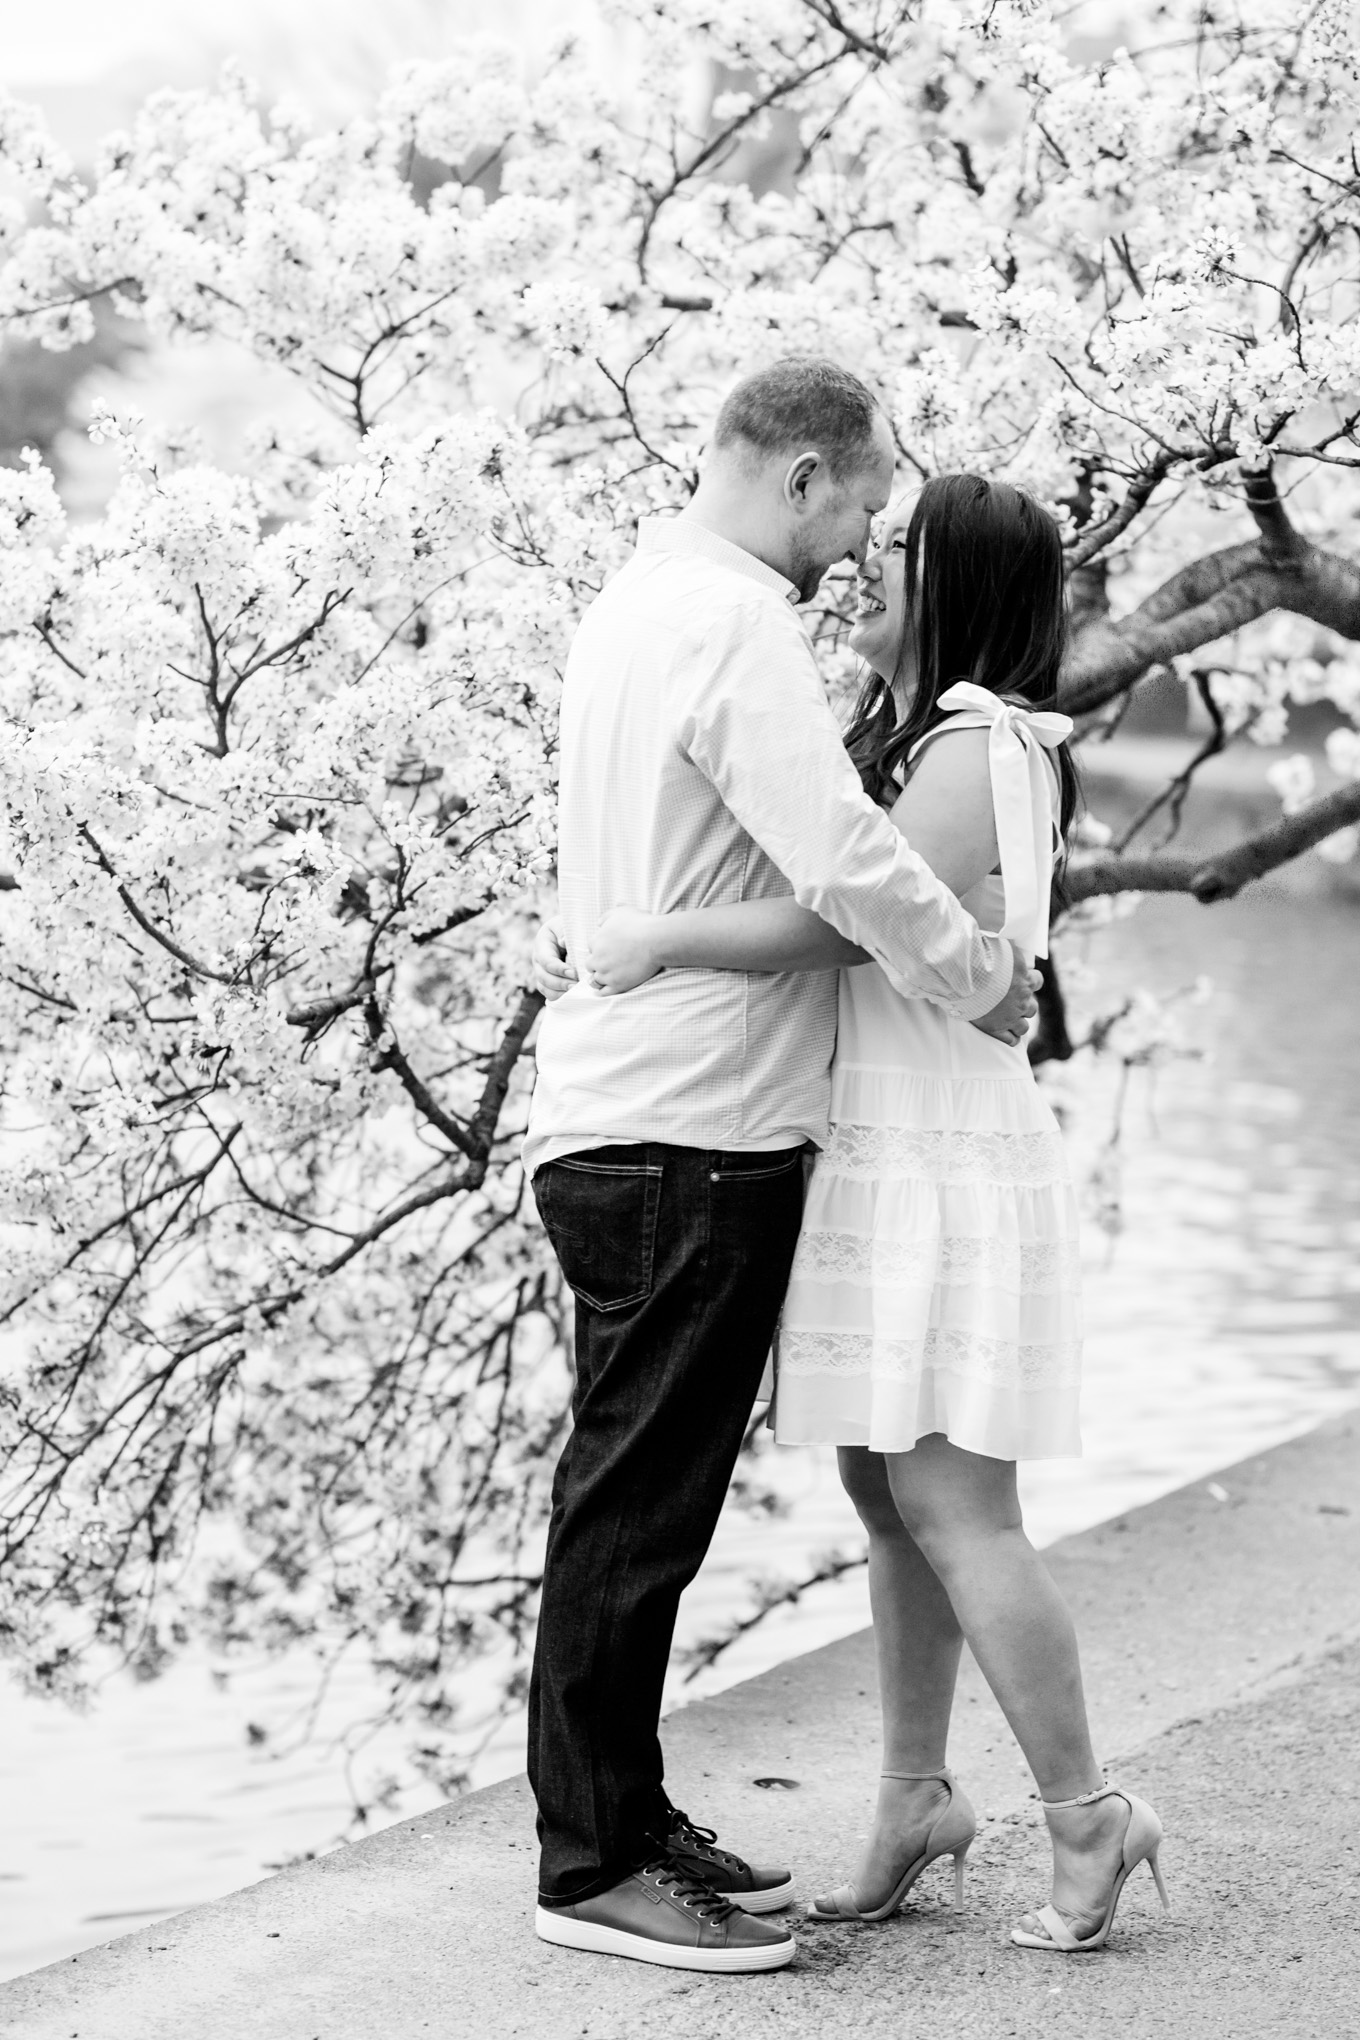 engaged couple, engagement portraits, photo shoot outfit ideas, cherry blossom engagement portraits, cherry blossom portraits, cherry blossoms, DC cherry blossoms, tidal basin, DC tidal basin, white cotton dress, white cotton sleeveless dress, bow sleeves, black and white photo, classic cherry blossom engagement session, D.C. engagement photographer